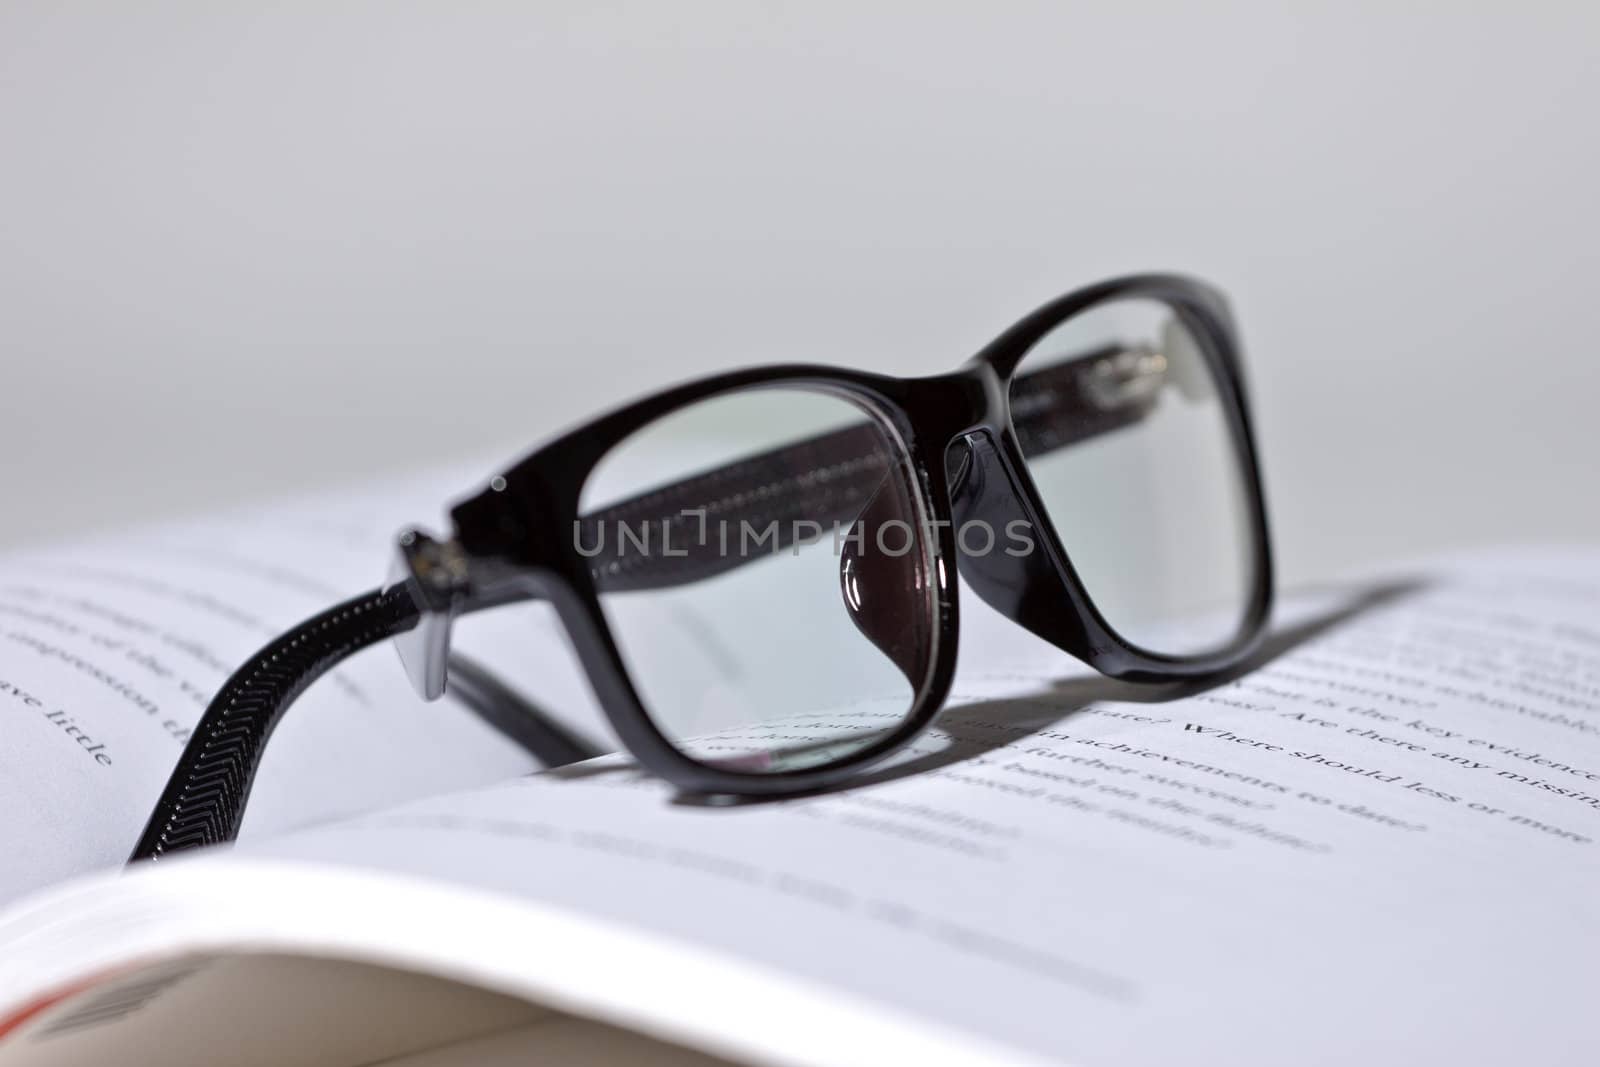 photo of eyeglasses lie on the book